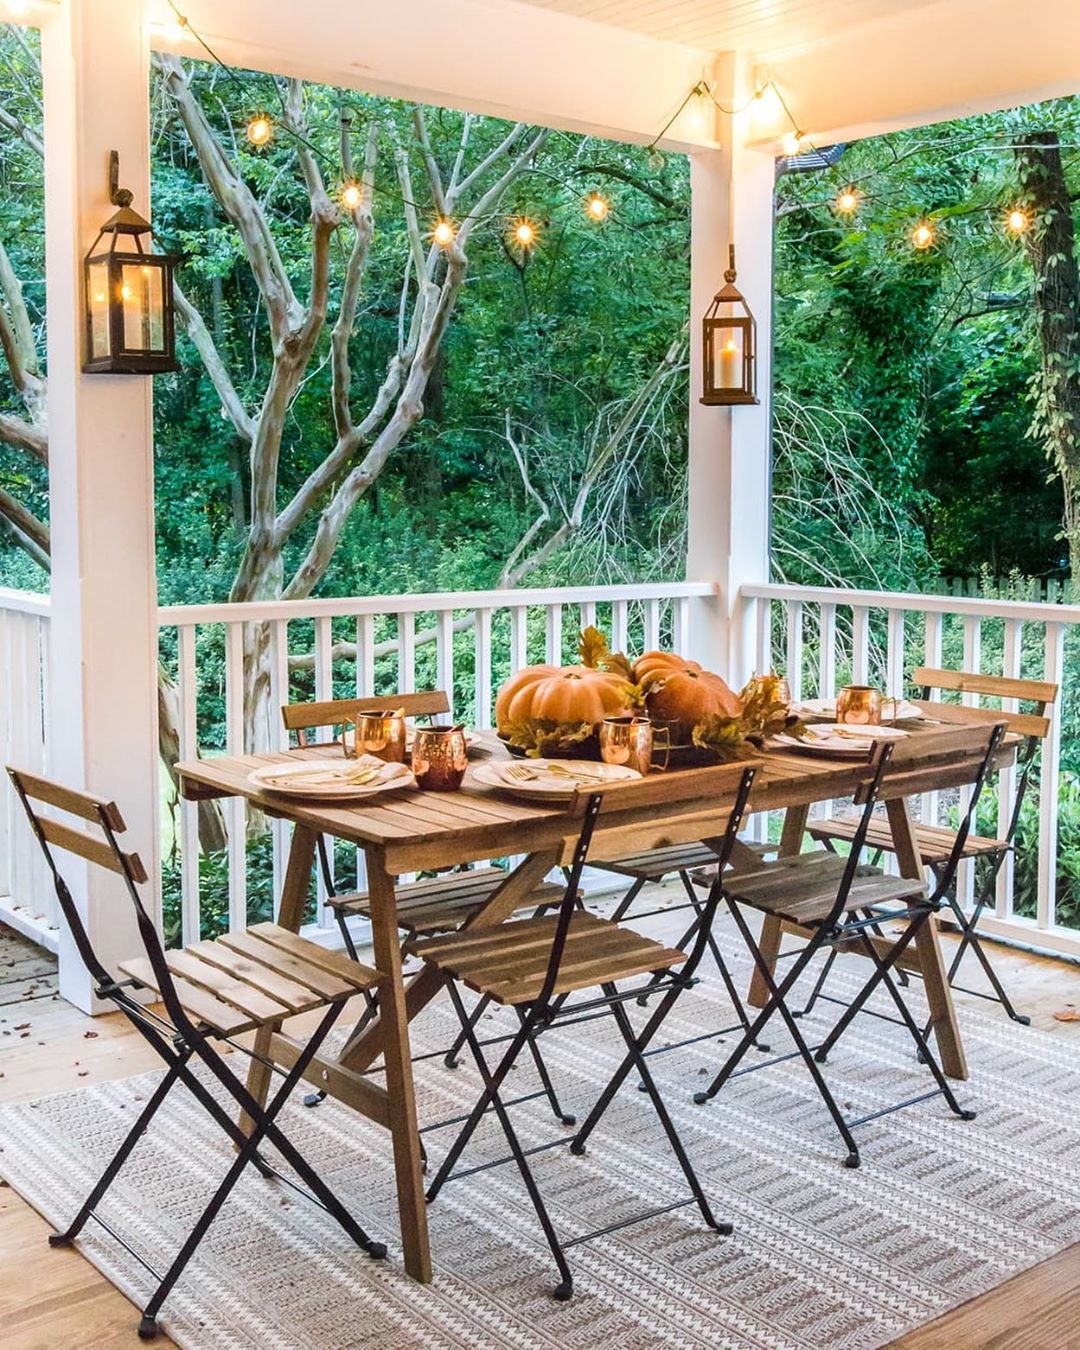 small table on a patio with string lights hanging between posts photo by Instagram user @blesserhouse